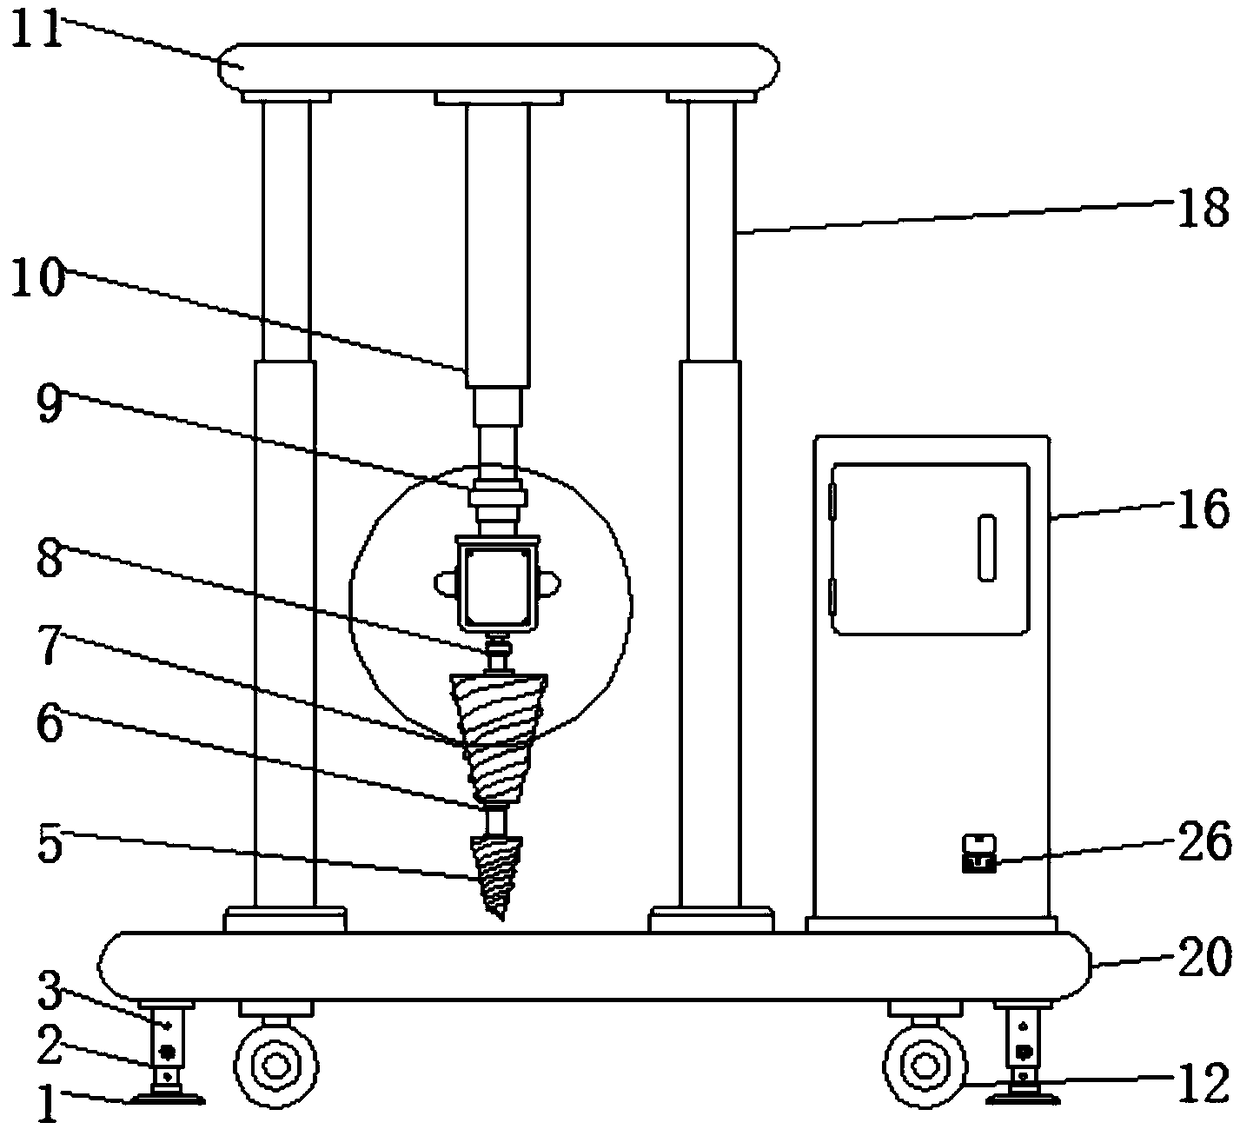 Reaming device for oil and gas drilling